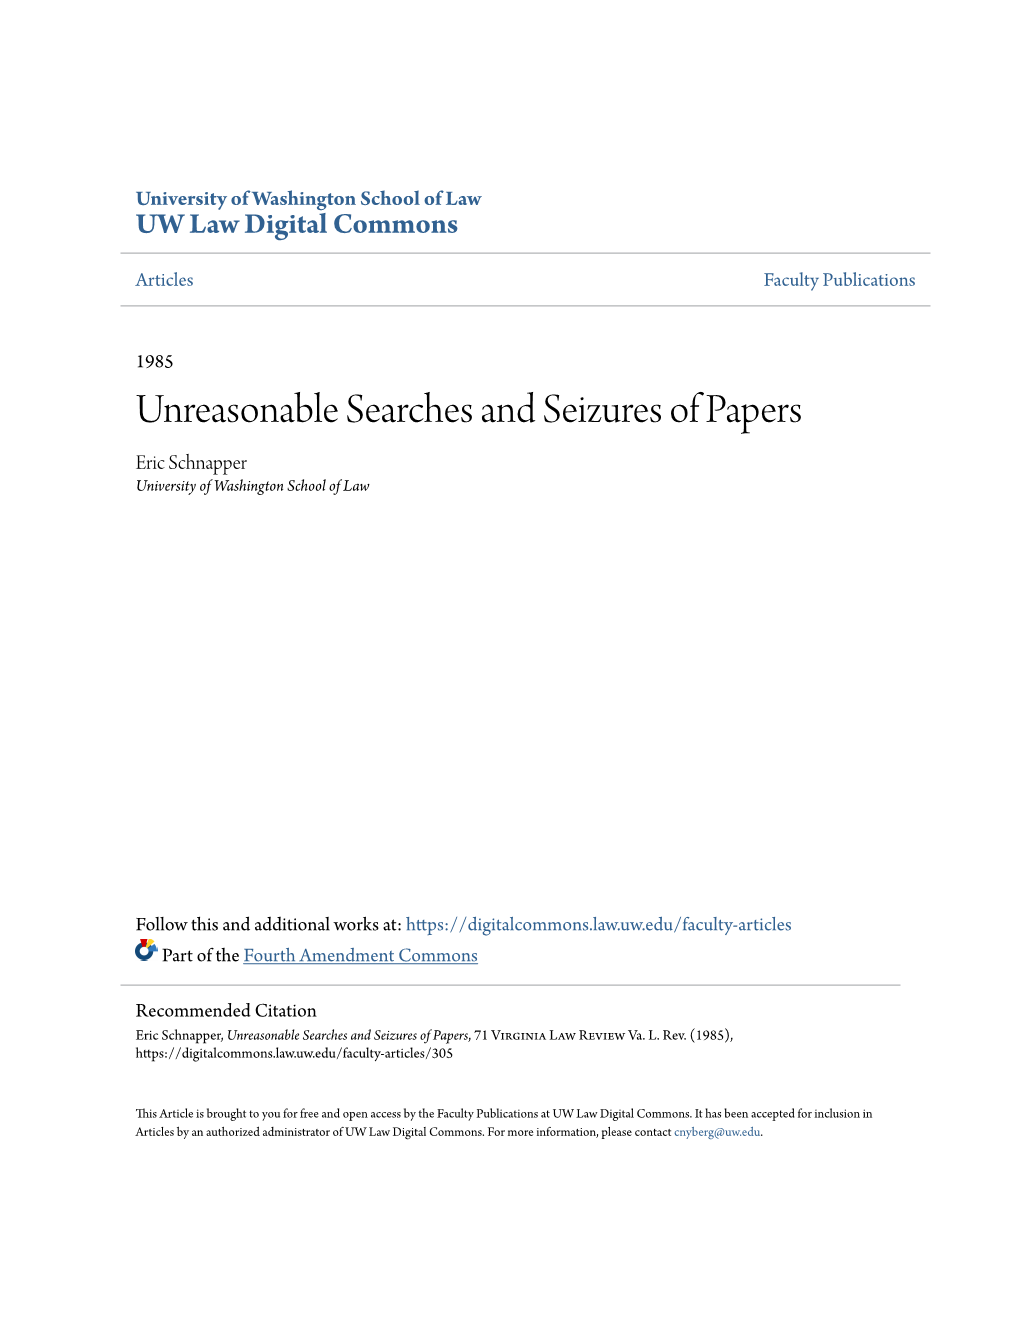 Unreasonable Searches and Seizures of Papers Eric Schnapper University of Washington School of Law